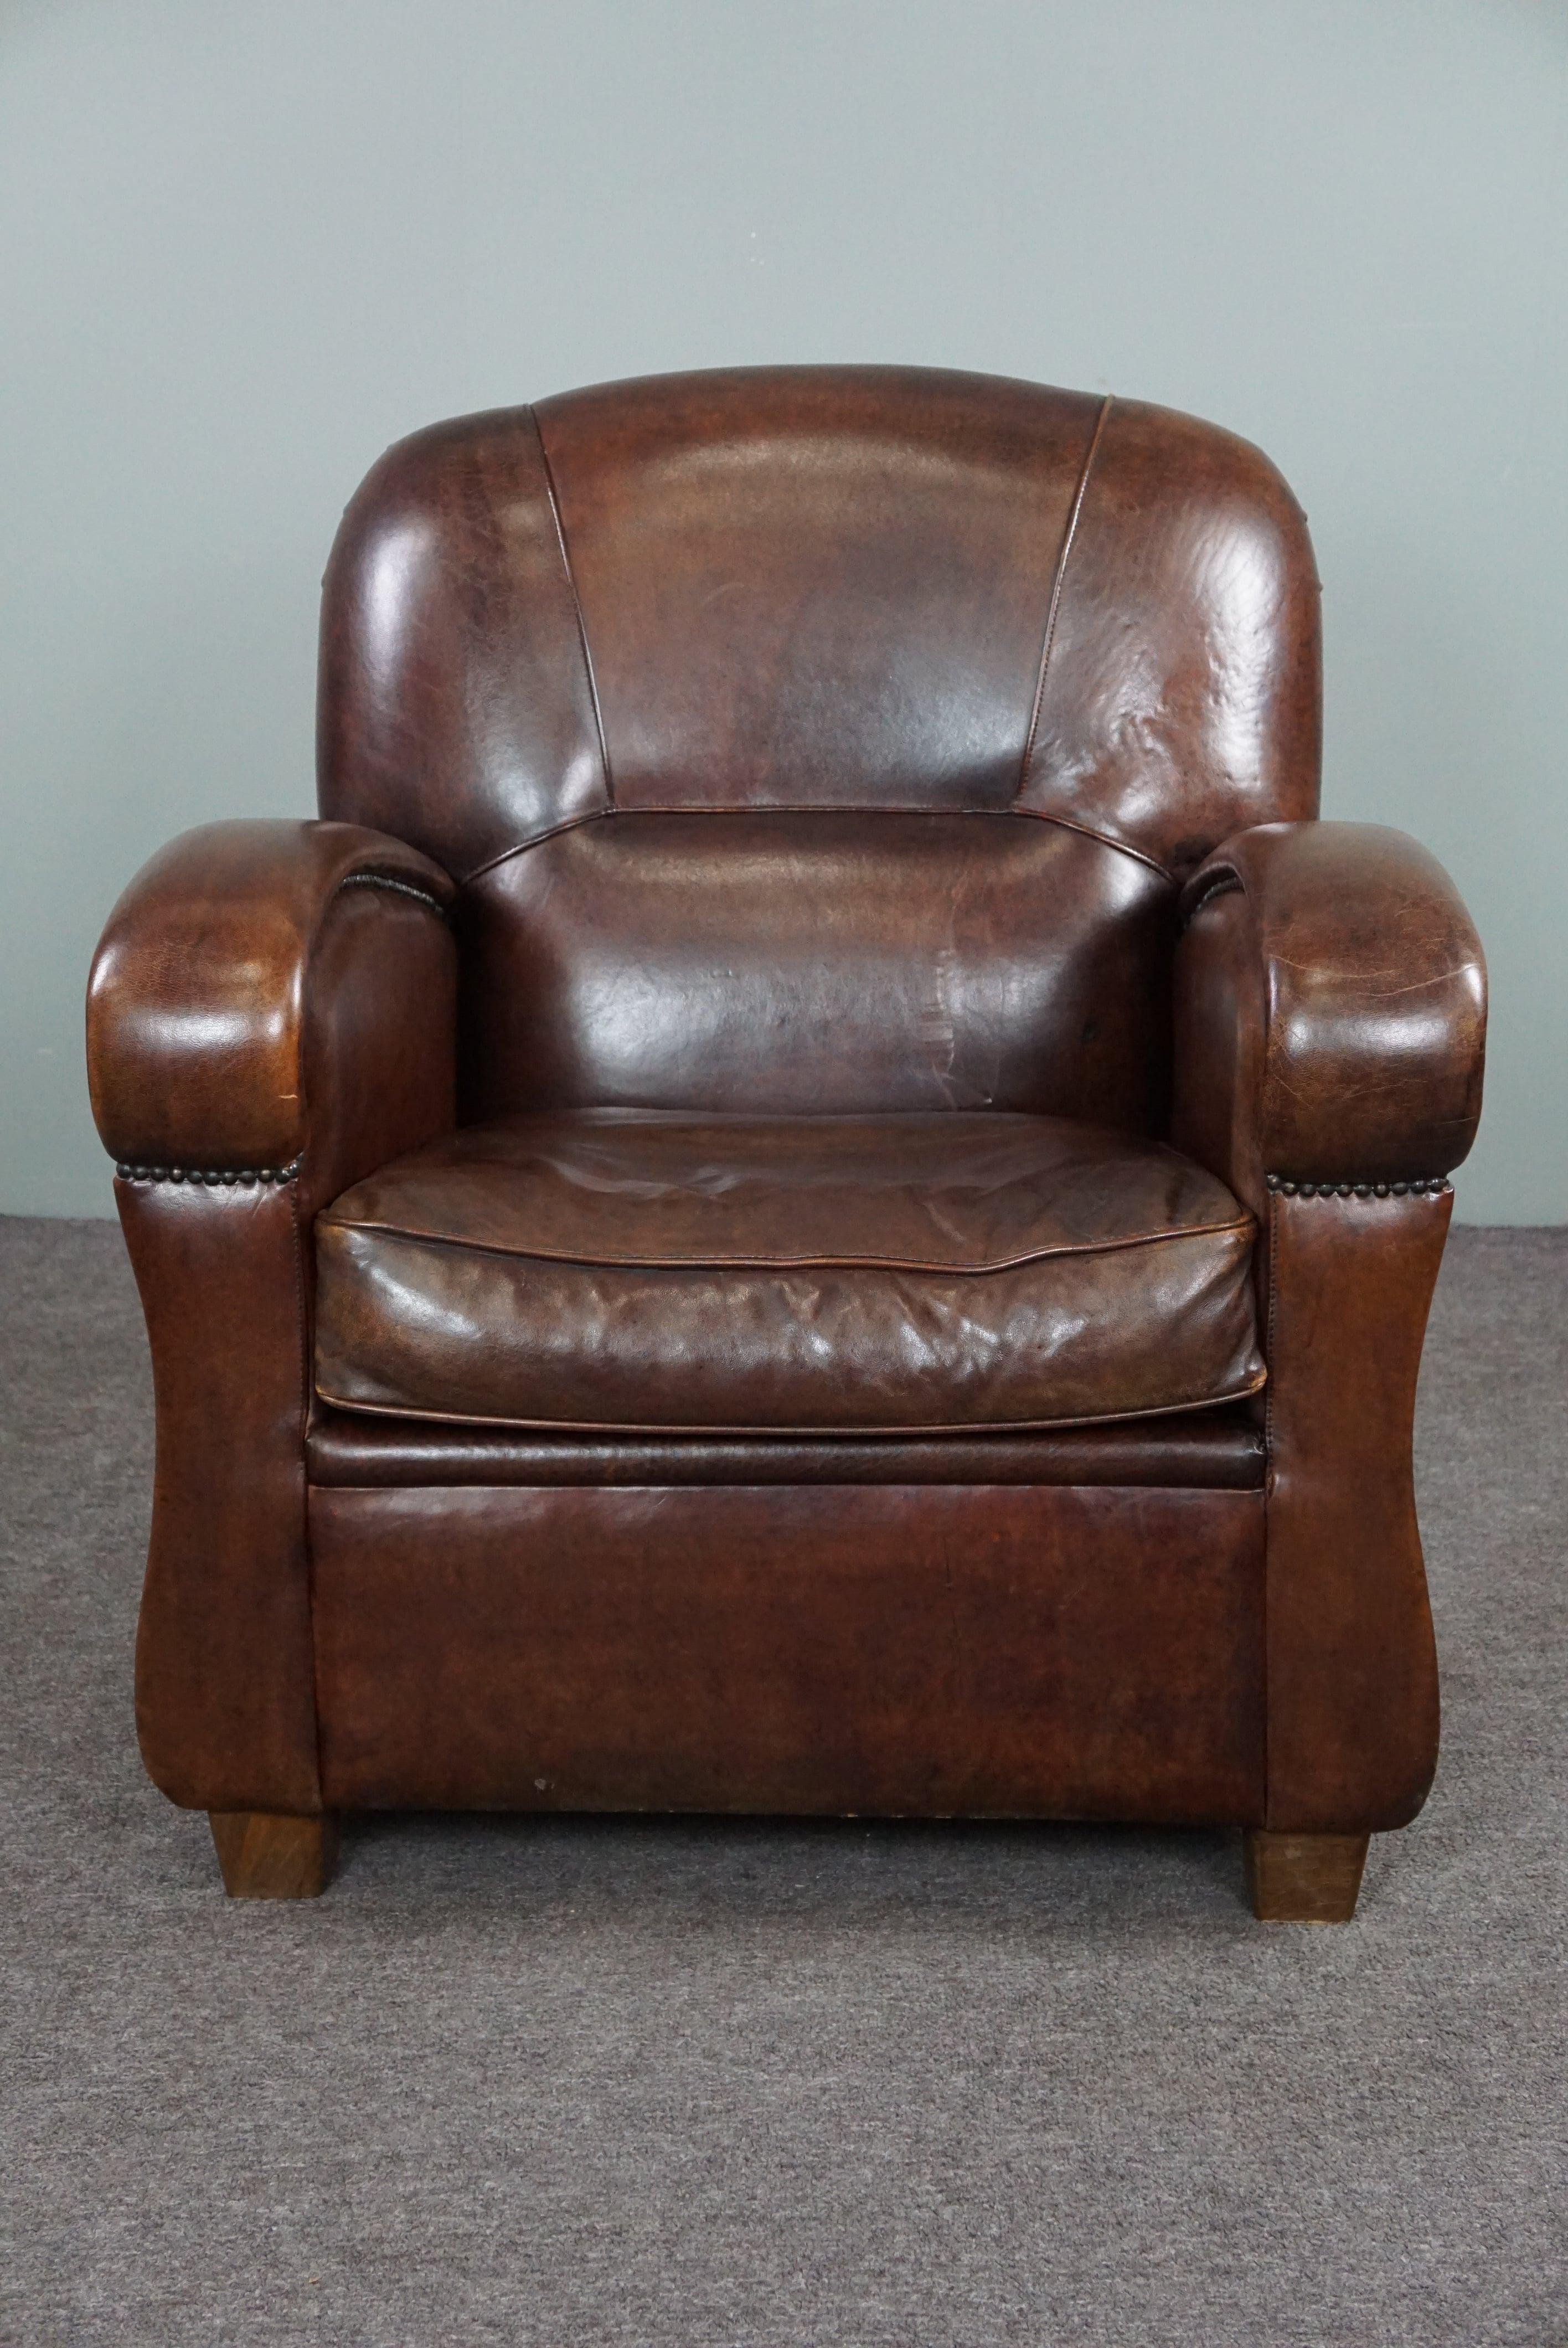 Offered is this beautiful, spacious sheepskin armchair.

This armchair has very good seating comfort and has a nice sleek design.
The warm color of the sheep leather and the sleek finish including decorative nails make this armchair a true